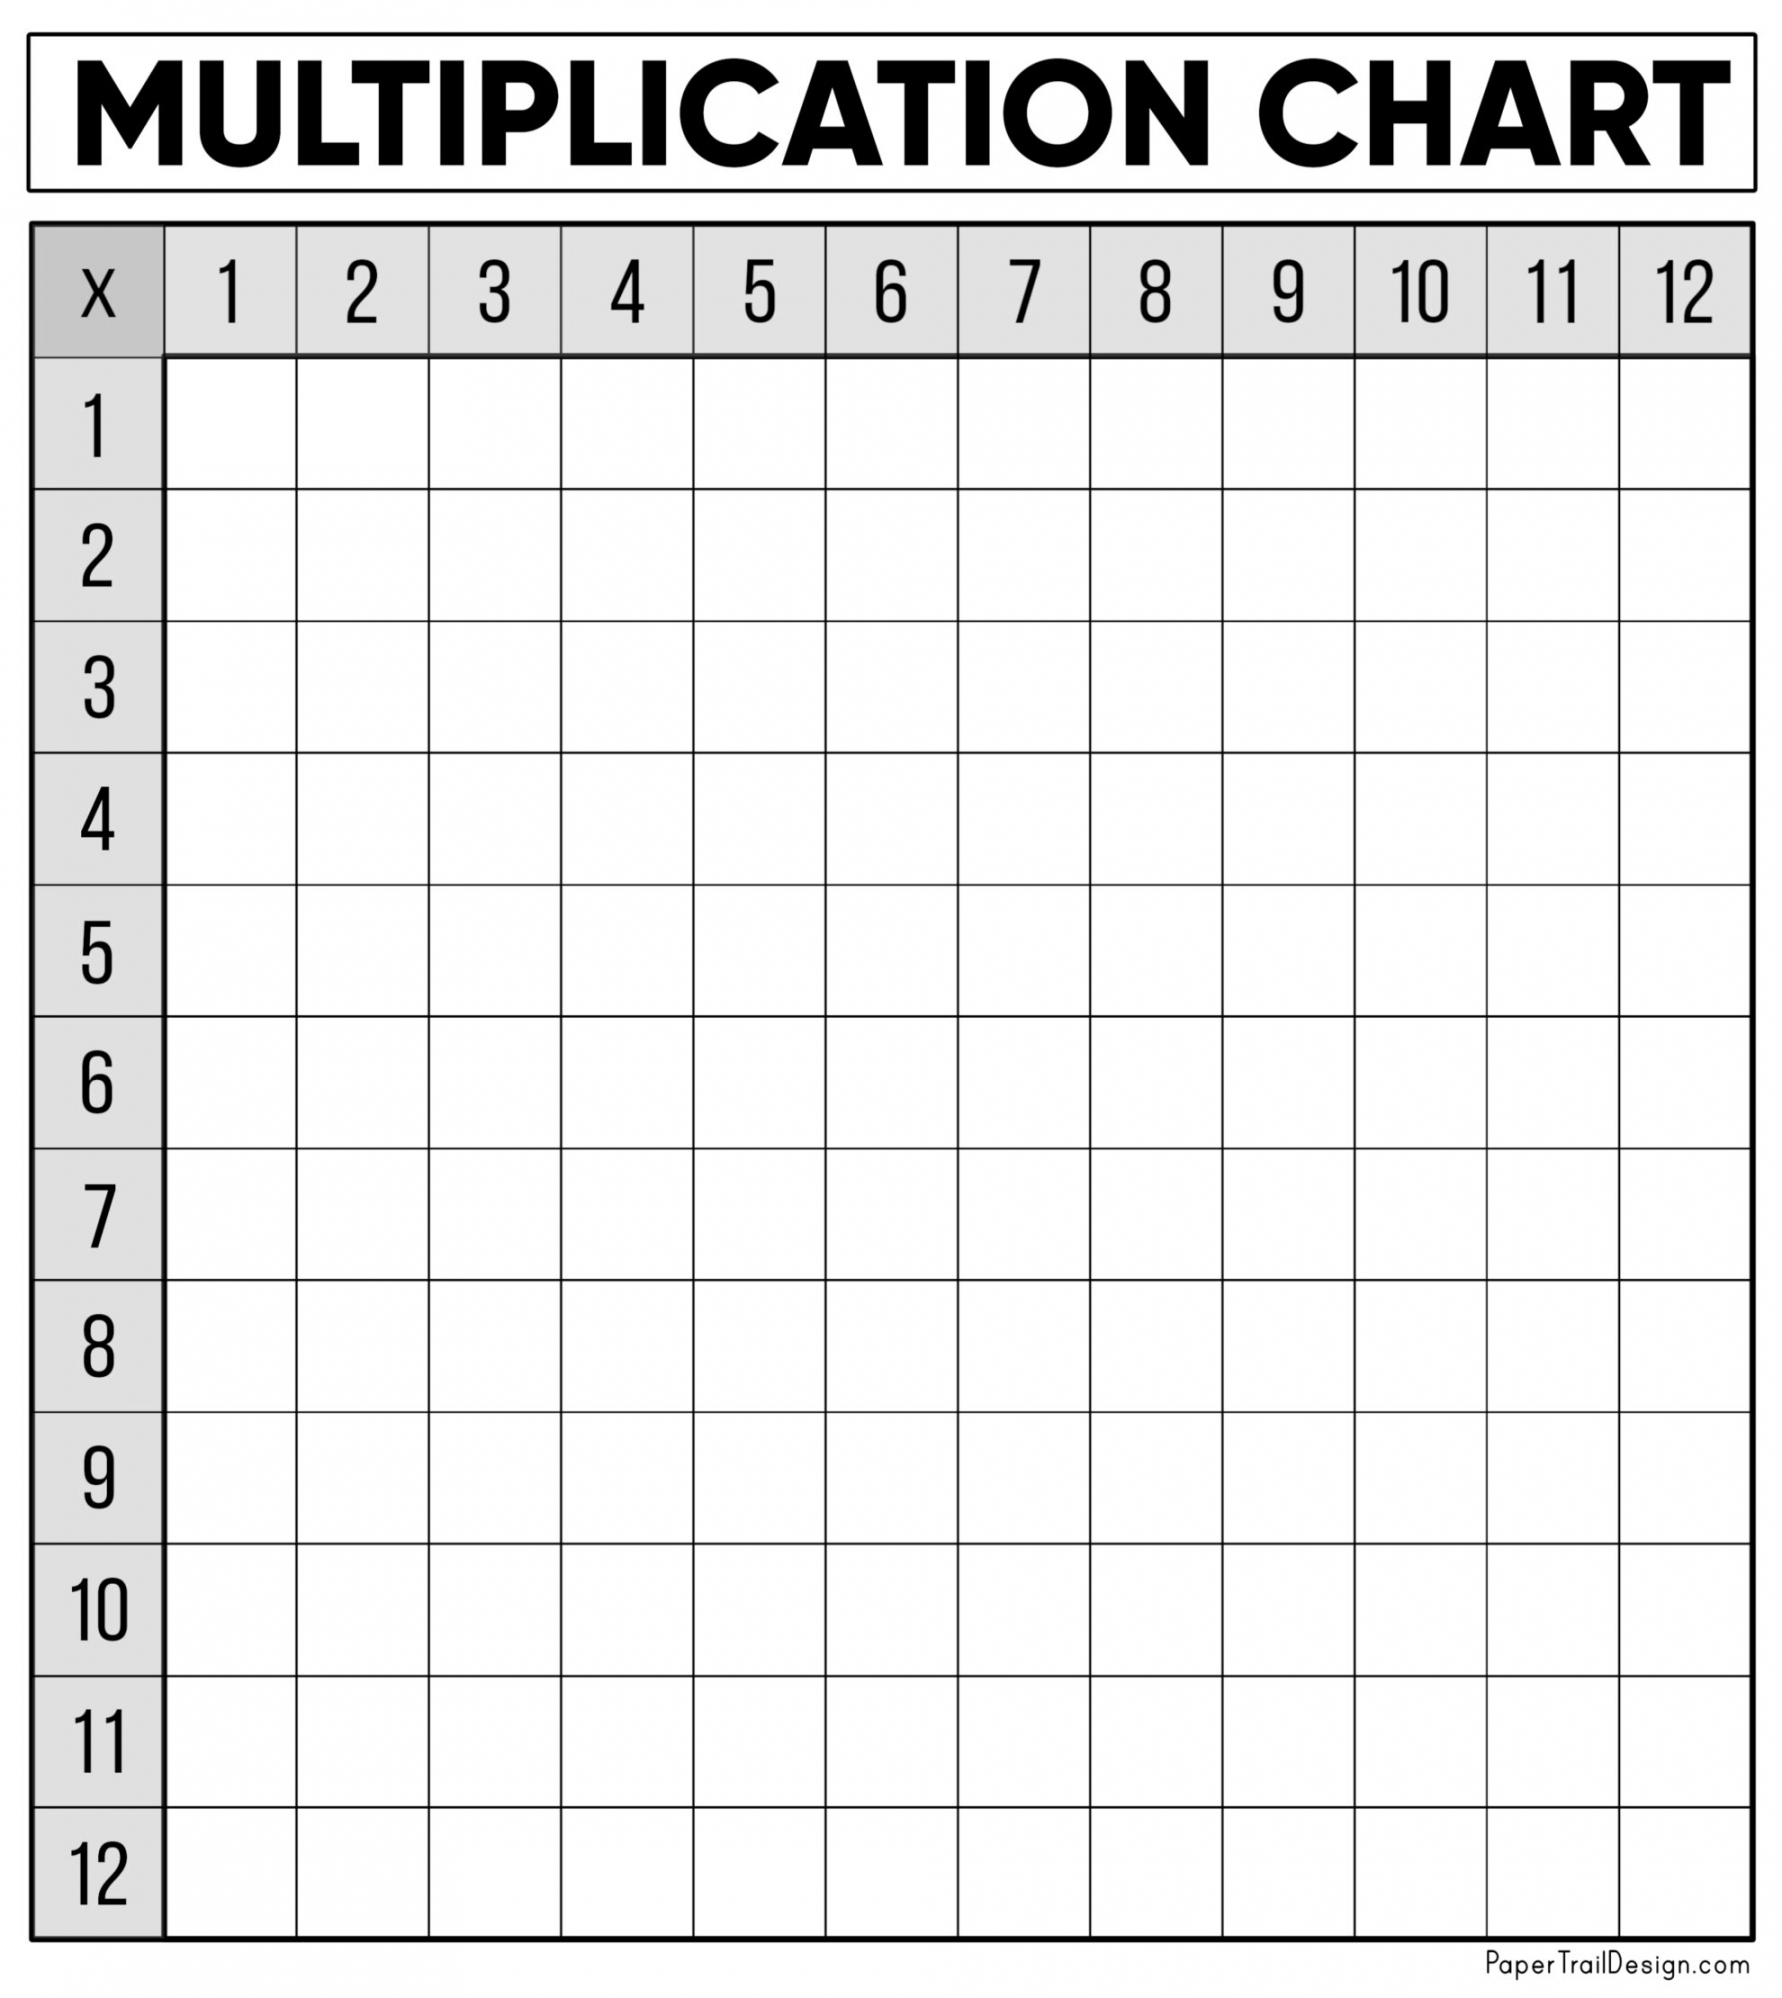 Free Multiplication Chart Printable - Paper Trail Design - FREE Printables - Blank Multiplication Table